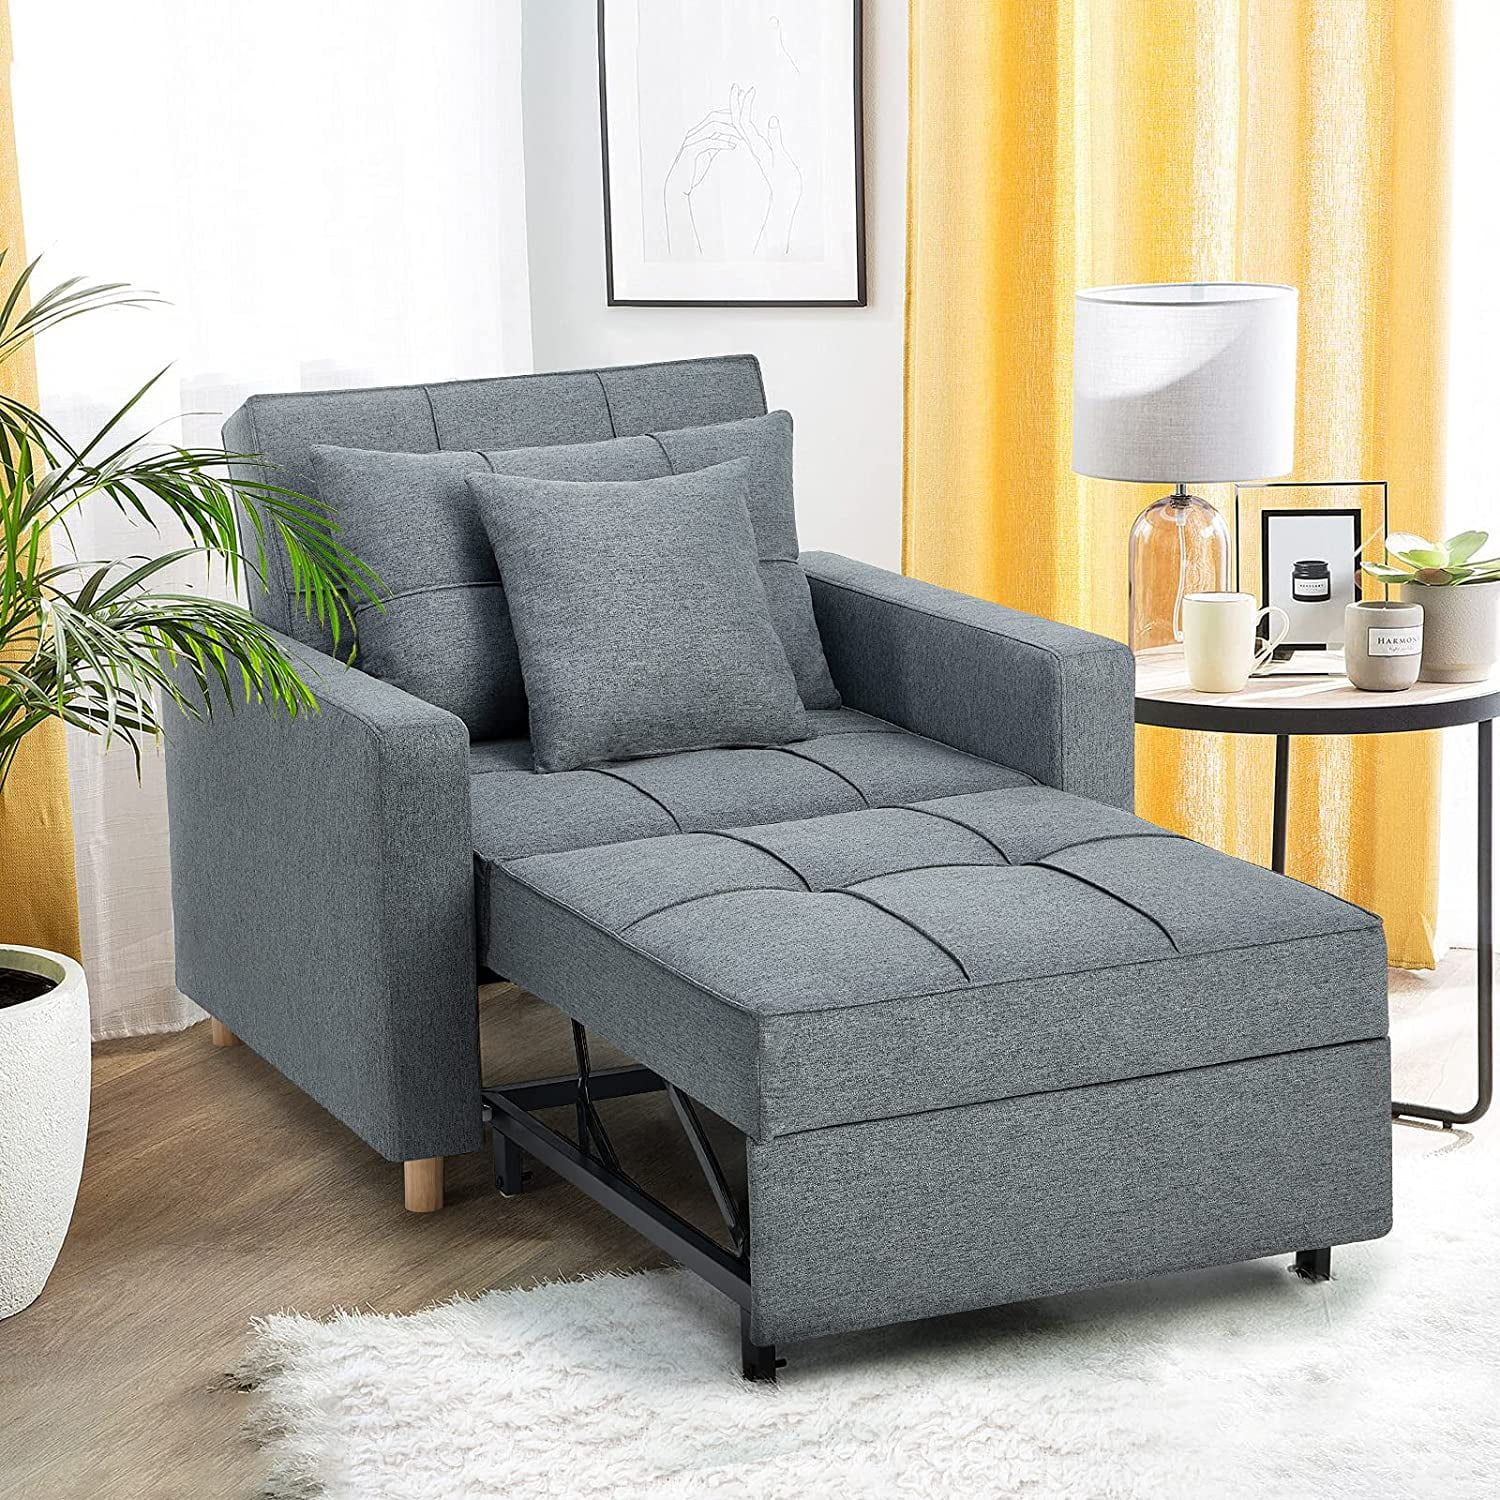 Yodolla 3 In 1 Futon Sofa Bed Chair With Adjustable Backrest Into A For Adjustable Backrest Futon Sofa Beds (View 5 of 20)